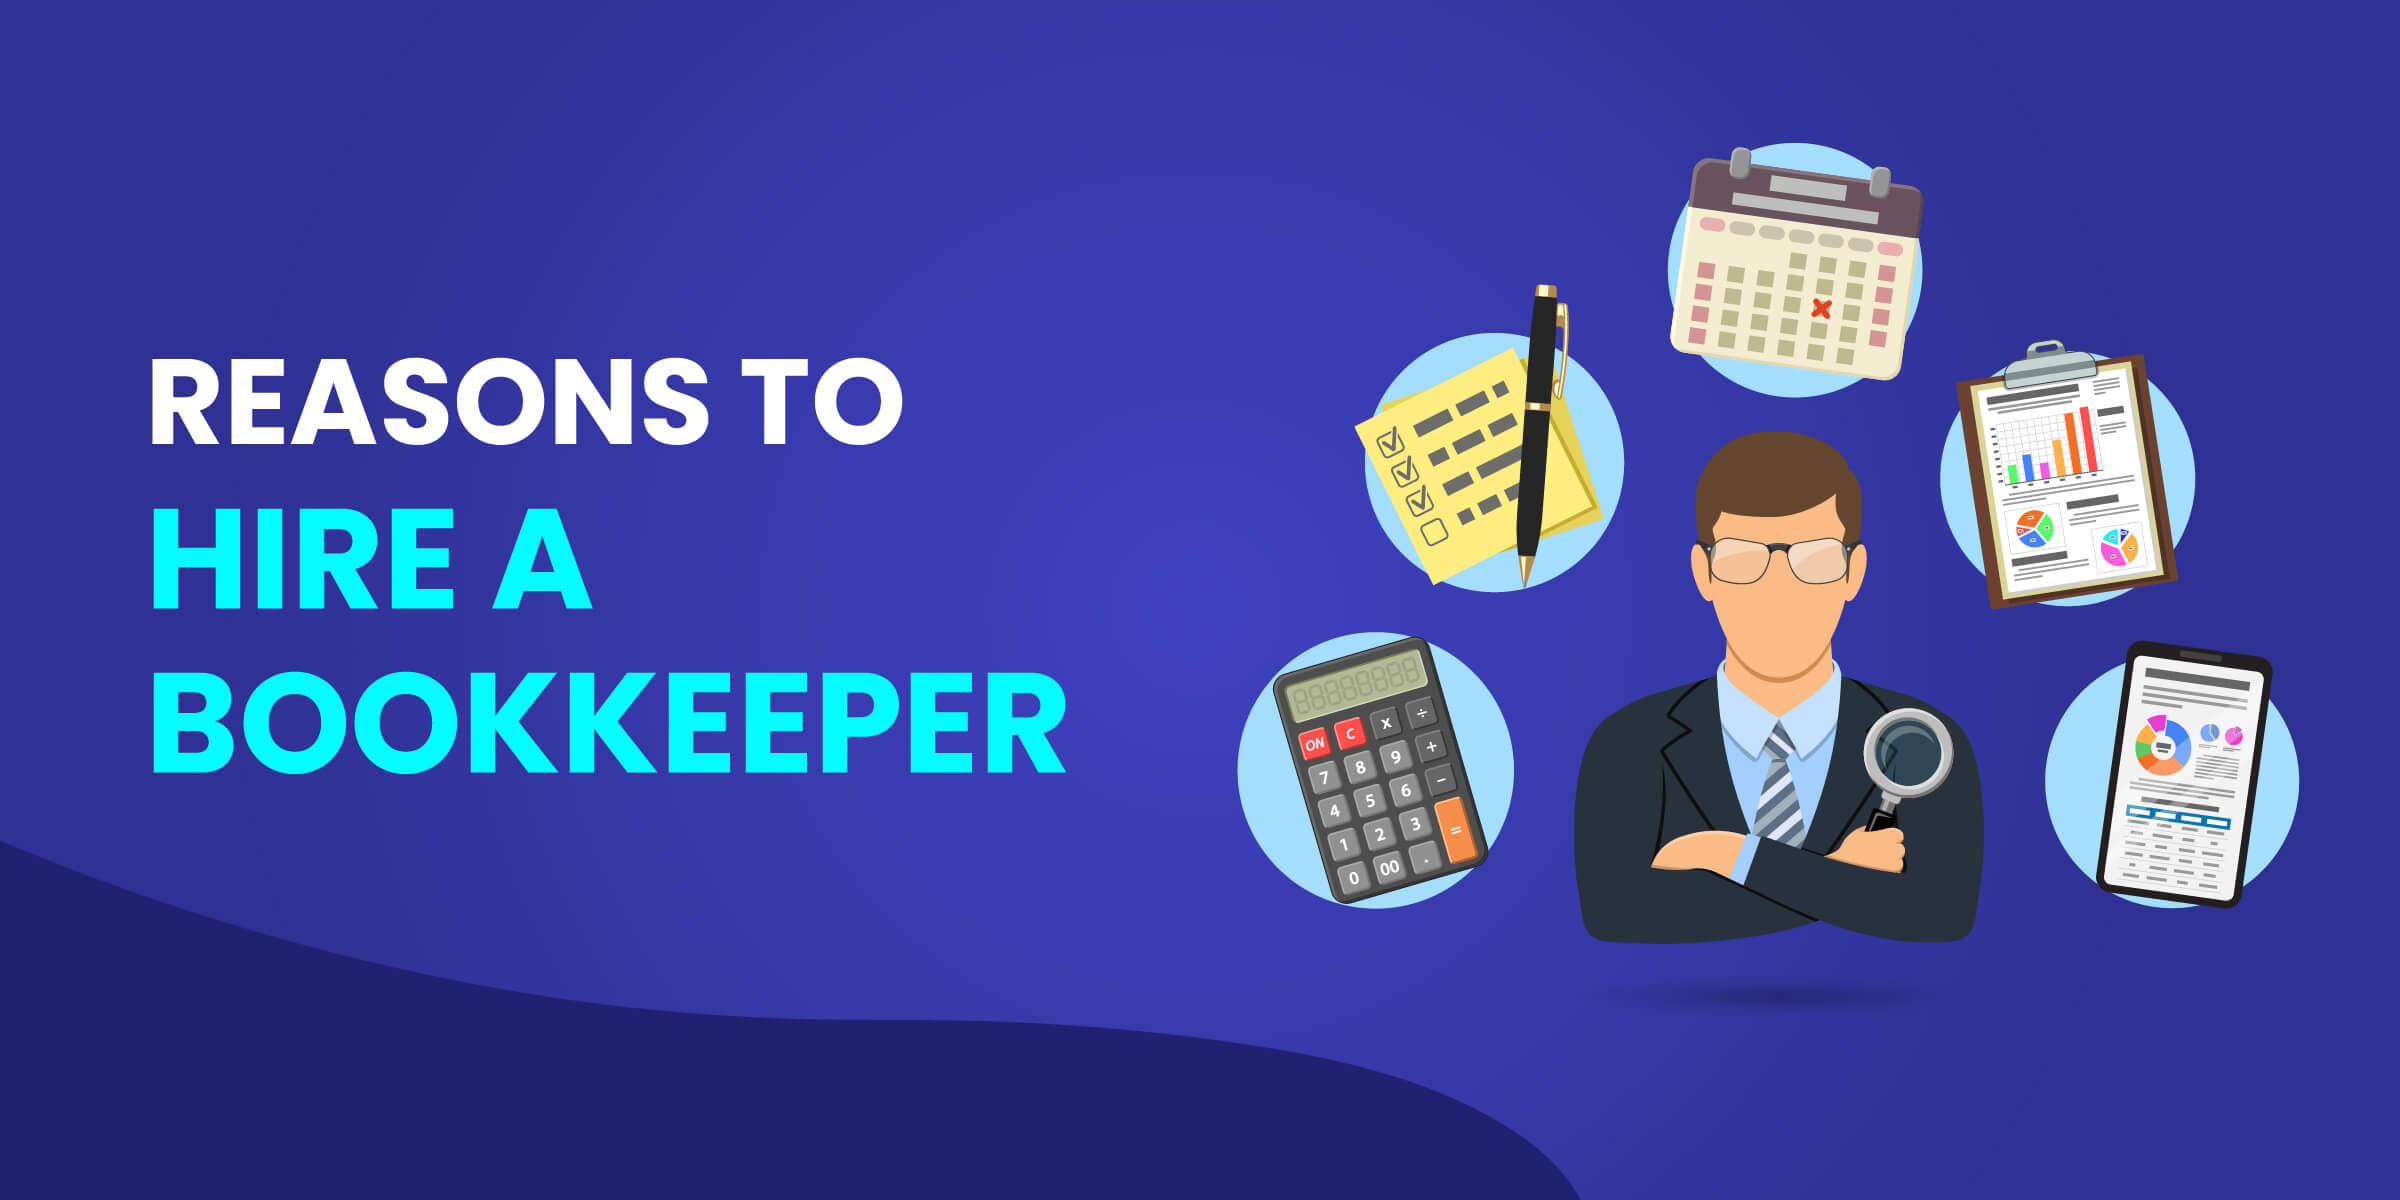 Reasons to Hire a Bookkeeper